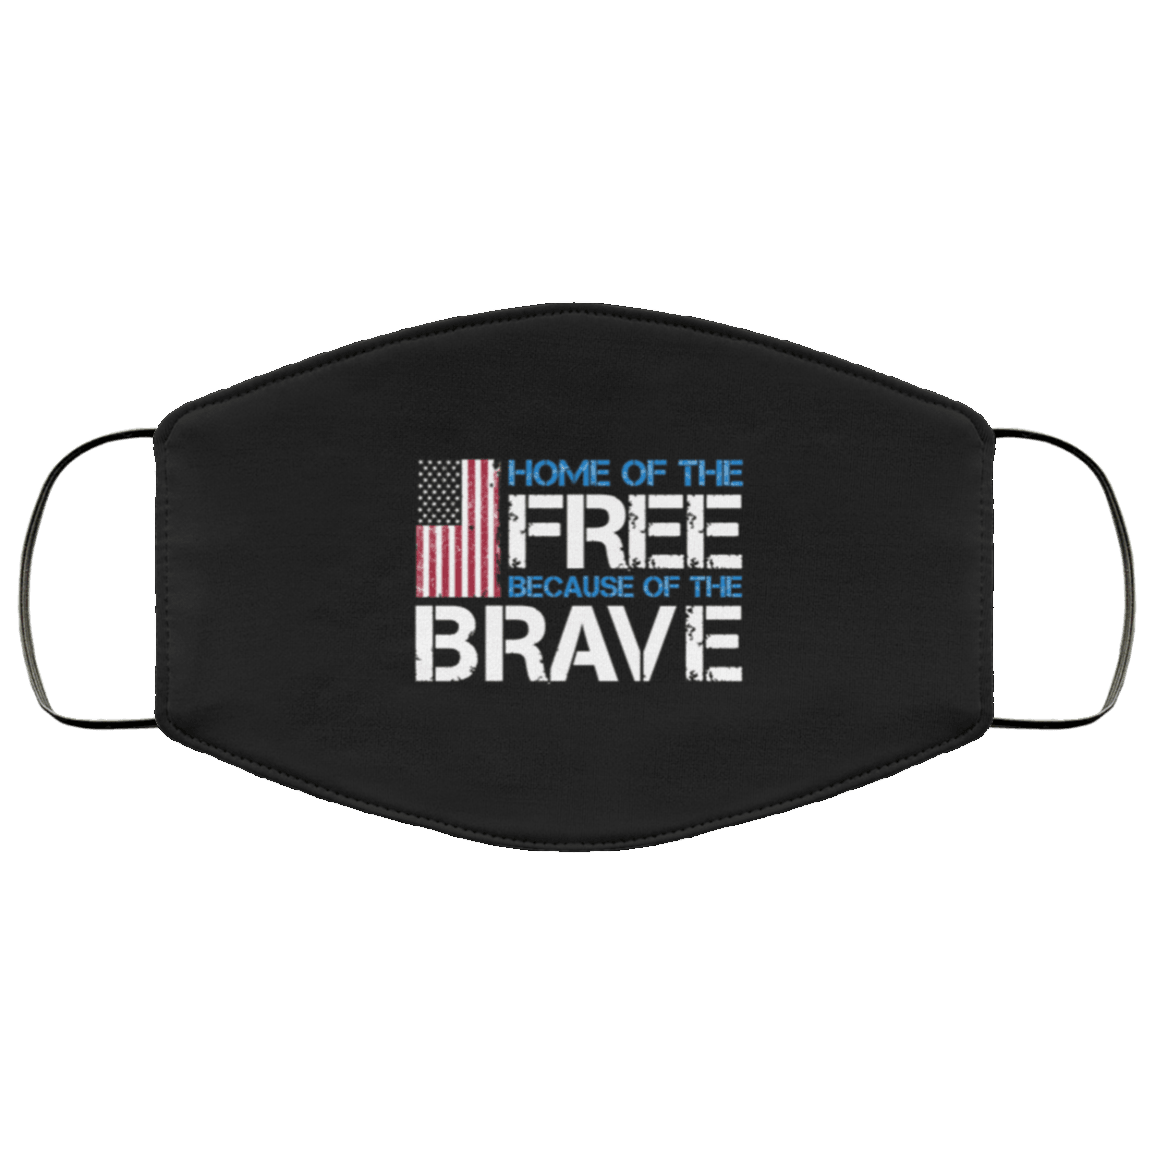 Designs by MyUtopia Shout Out:Home of the Free Because of the Brave US Flag Adult Fabric Face Mask with Elastic Ear Loops,3 Layer Fabric Face Mask / Black / Adult,Fabric Face Mask